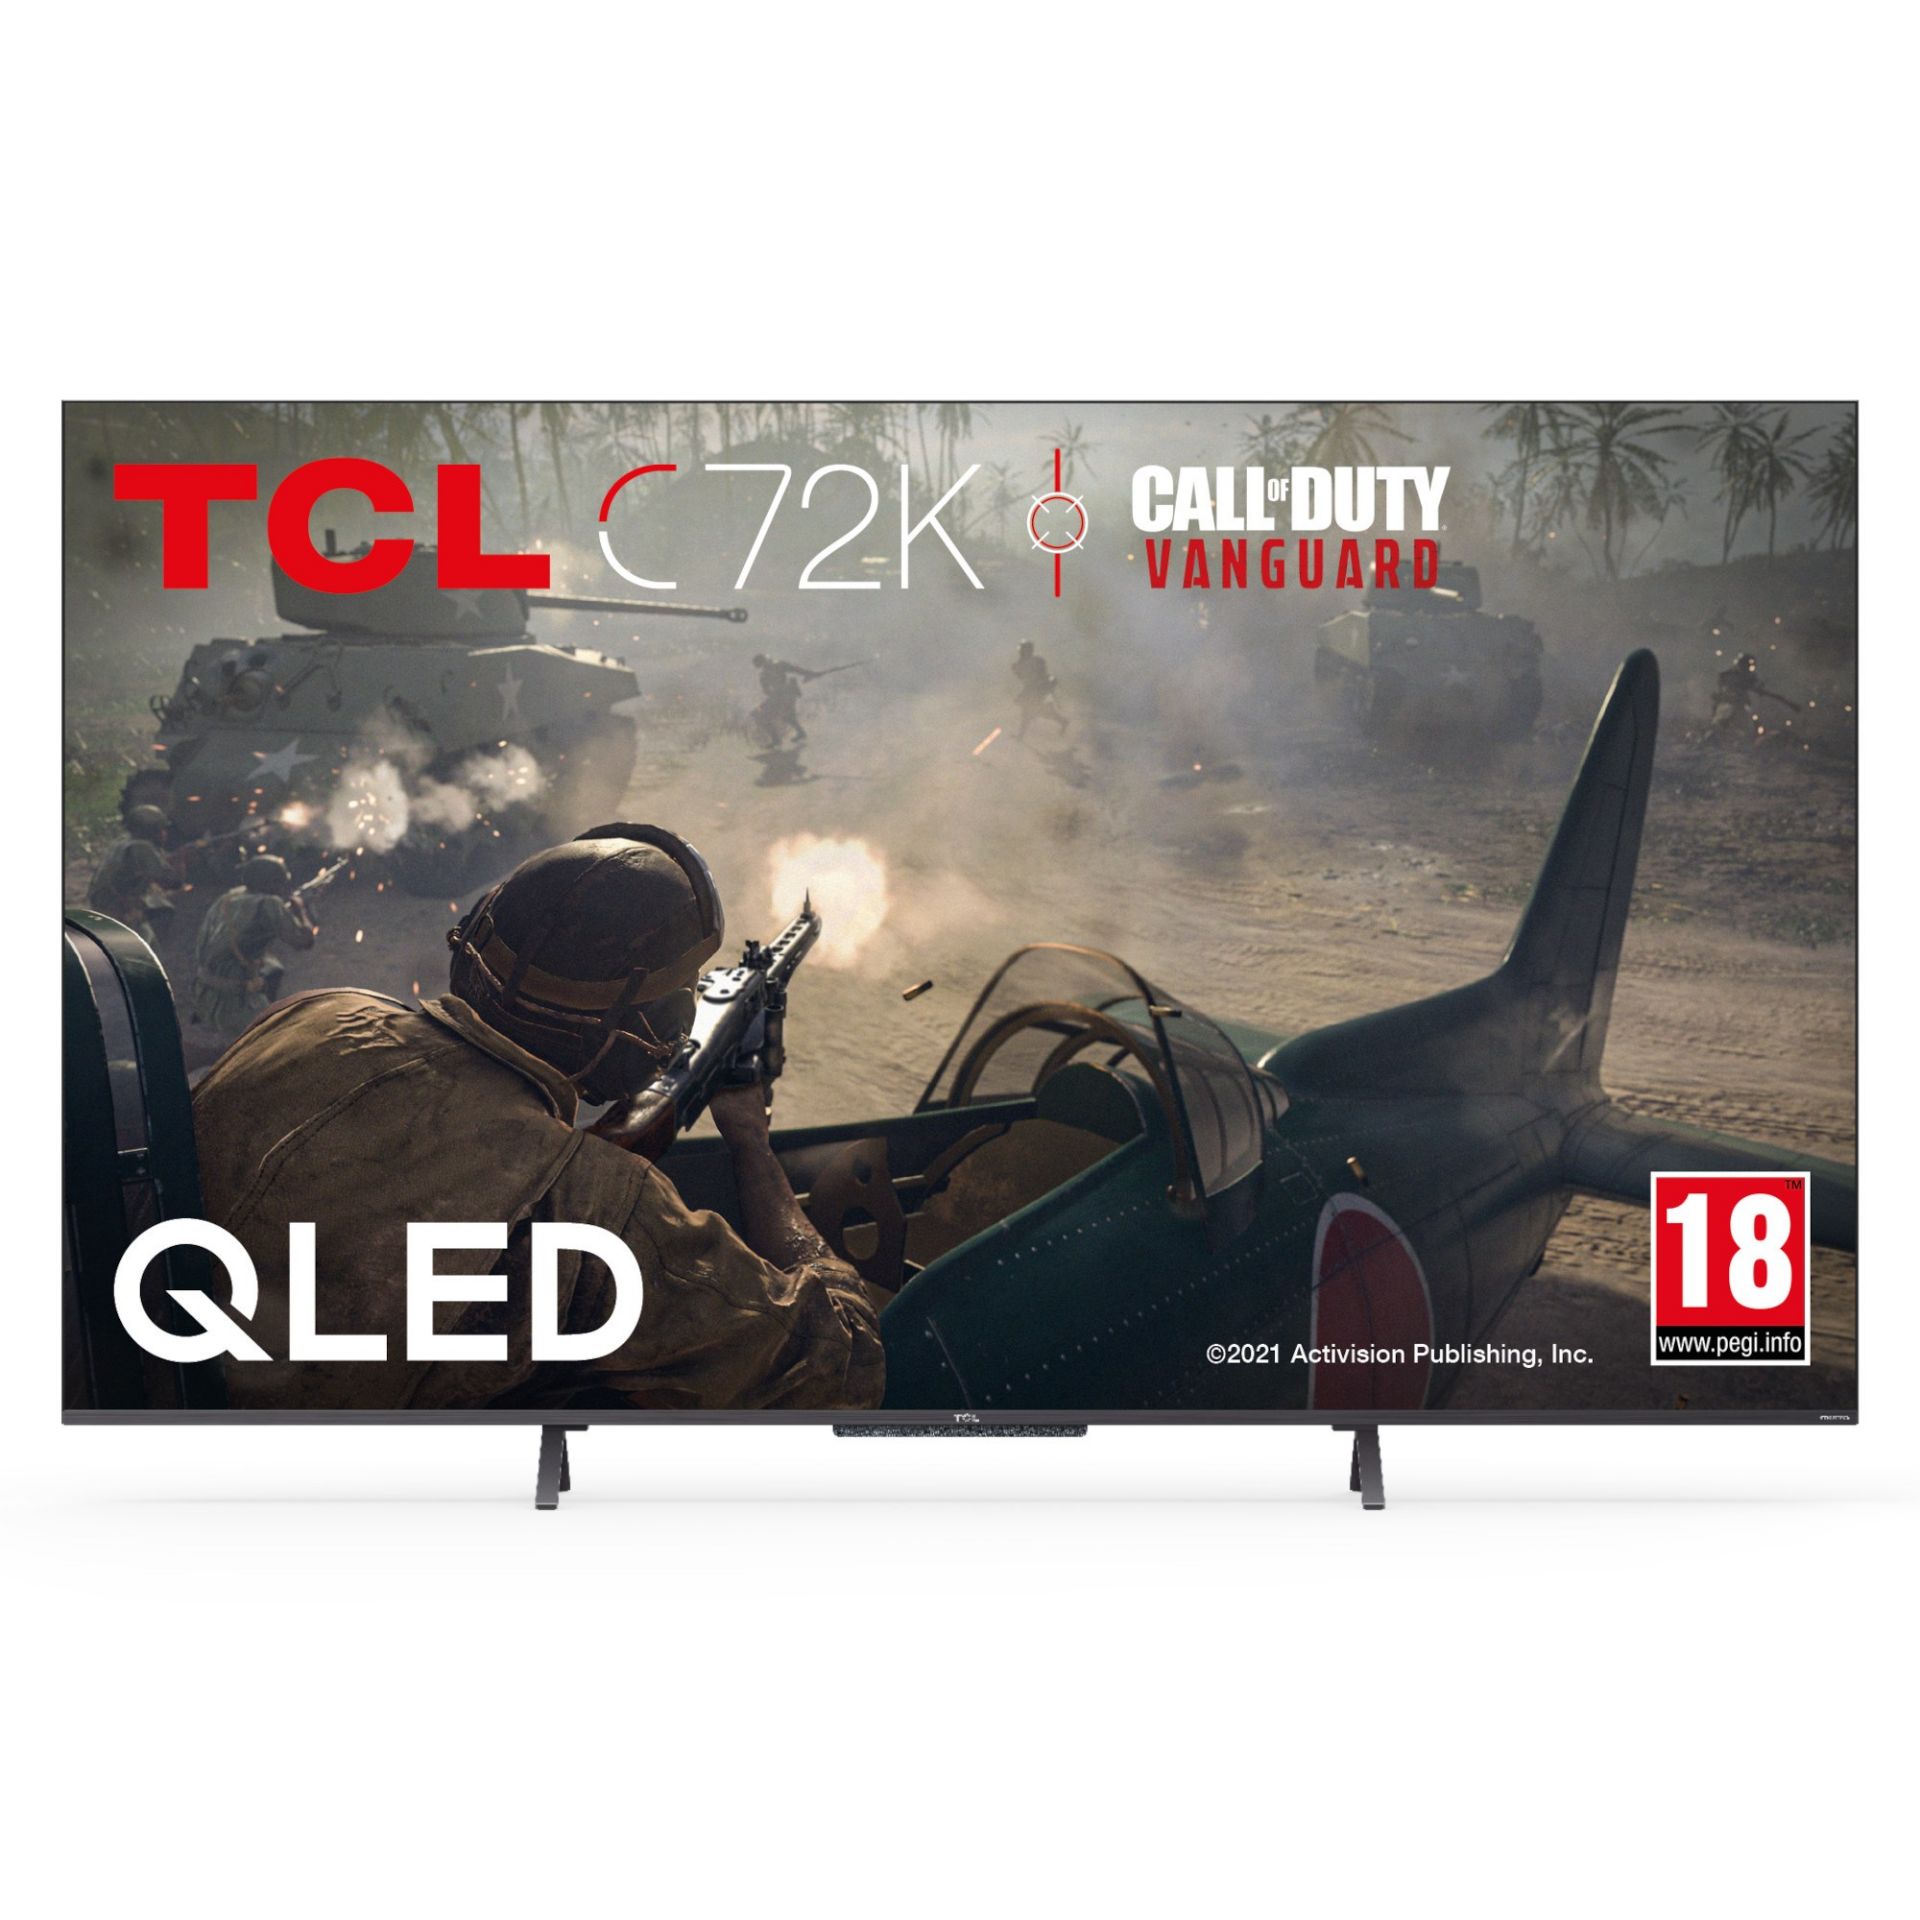 1 TCL 55C720K 55 INCH QLED 4K ULTRA HD SMART ANDROID TV WITH STAND AND REMOTE RRP Â£499 (WORKING)